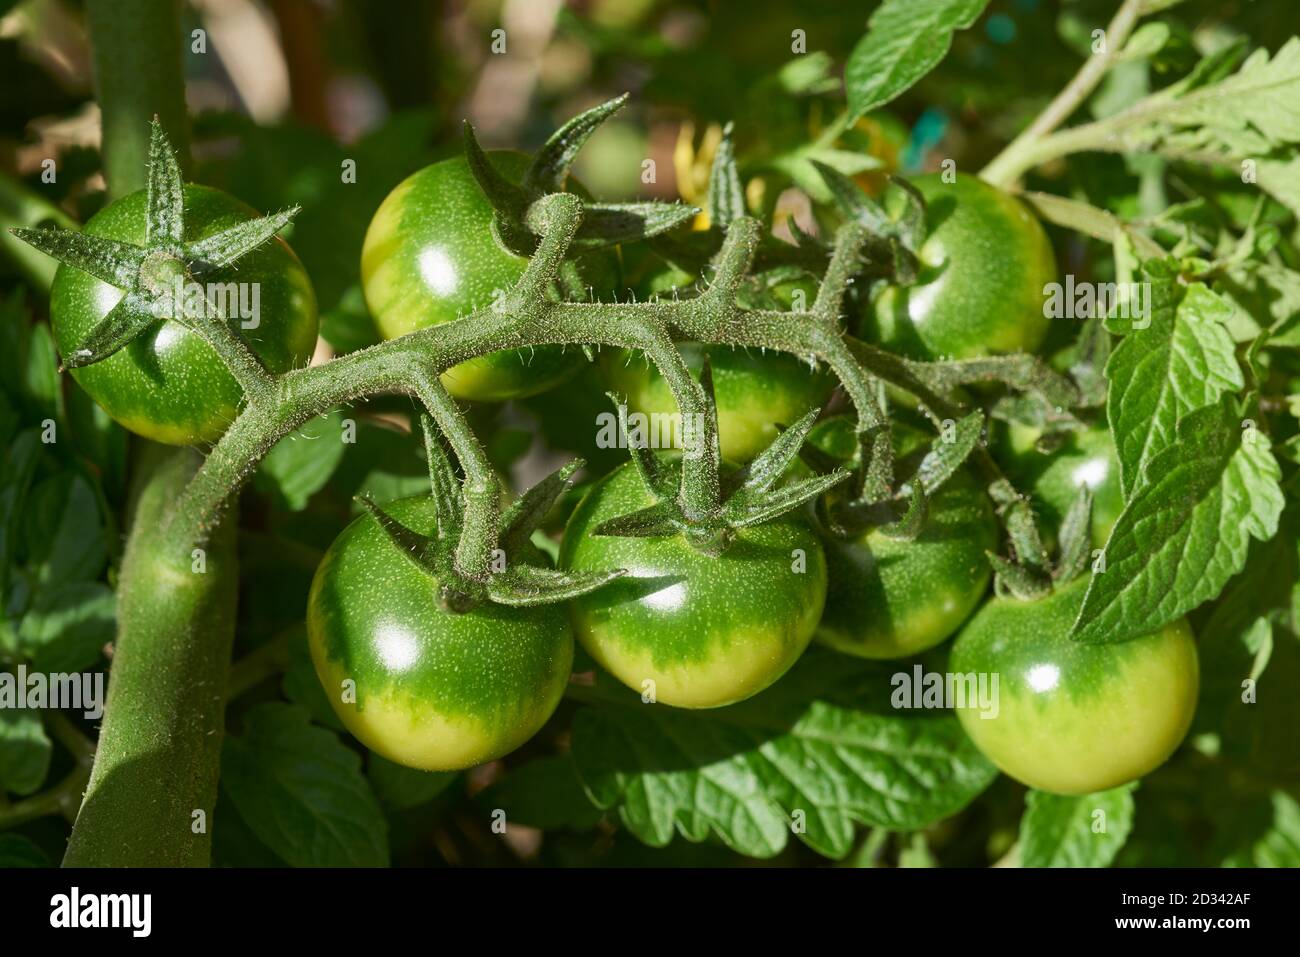 Unripe tomatoes growing on a tomato plant outdoors in the sunshine Stock Photo